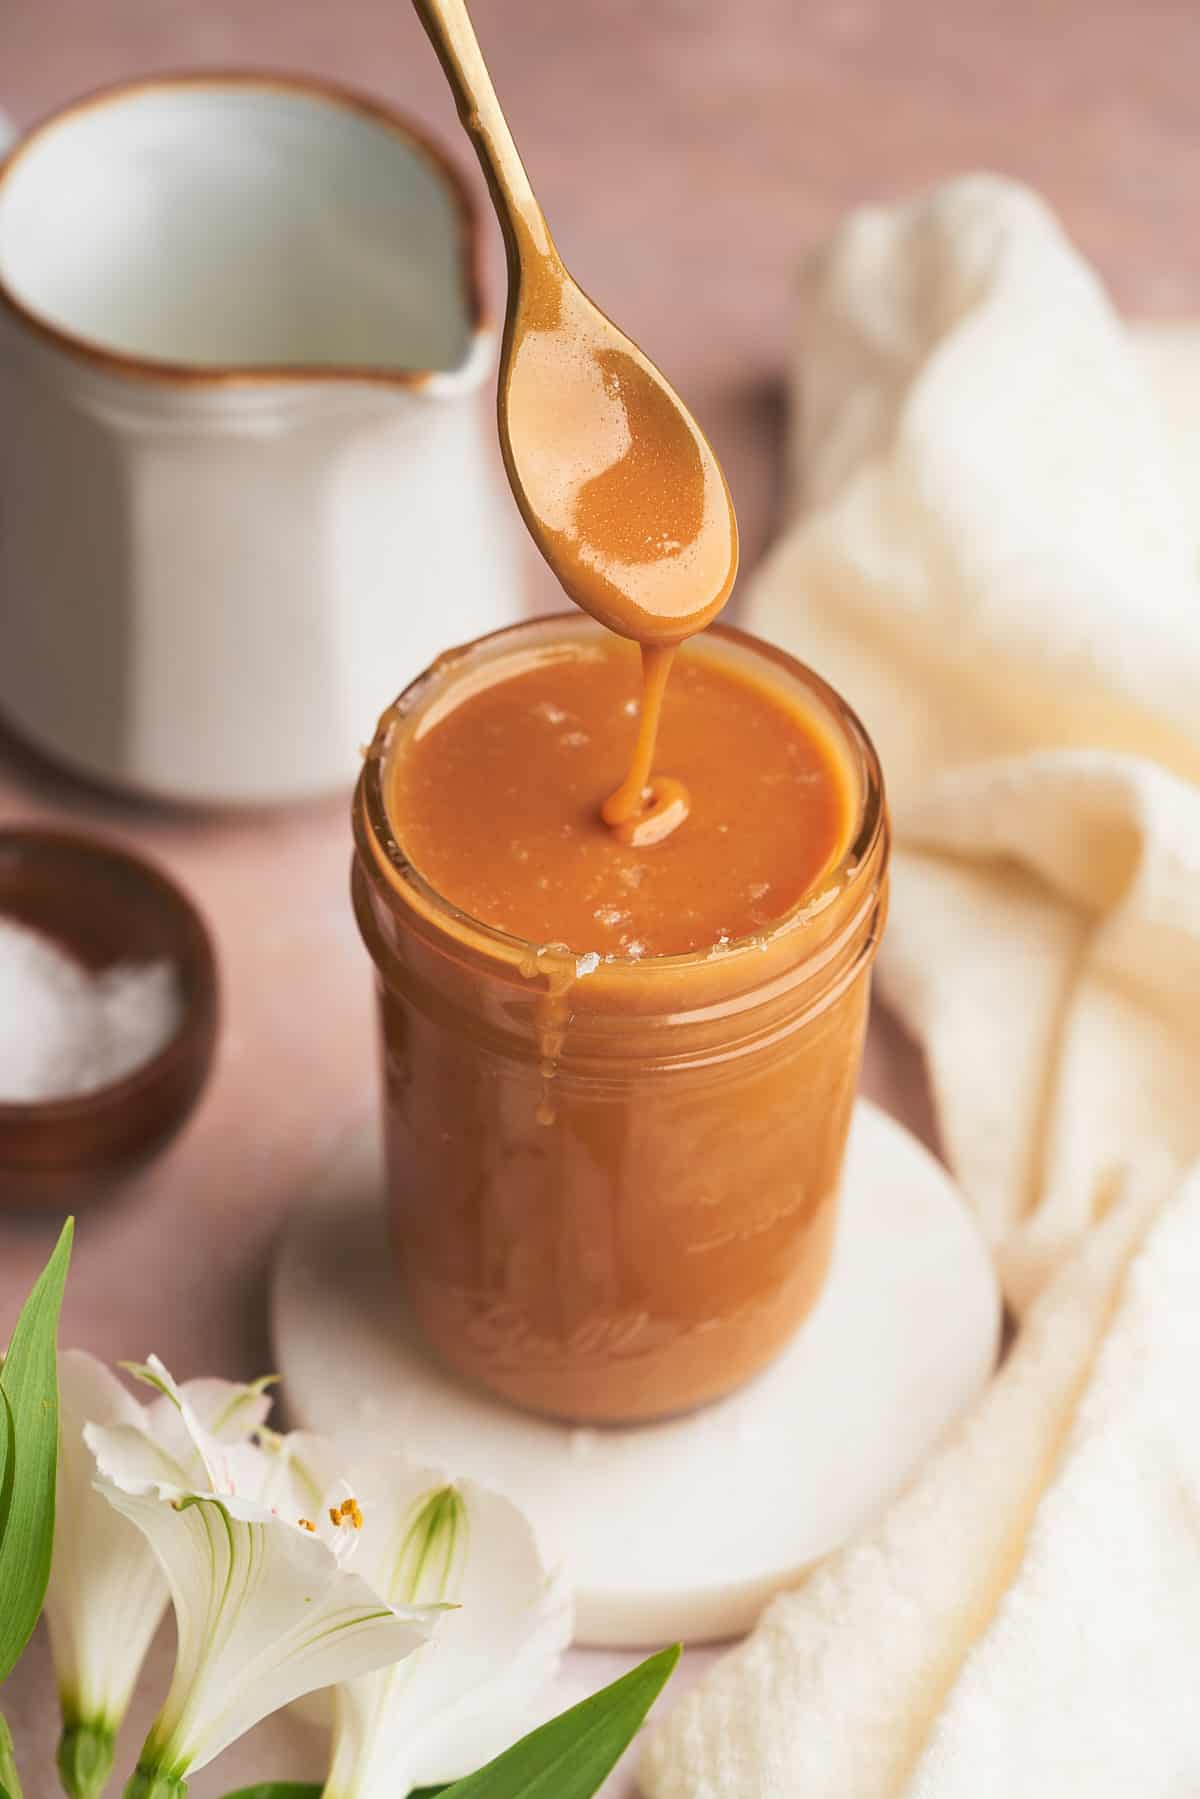 spoon dipping into a jar of salted keto caramel sauce, with with flowers in the foreground and a cream pitcher in the background. 